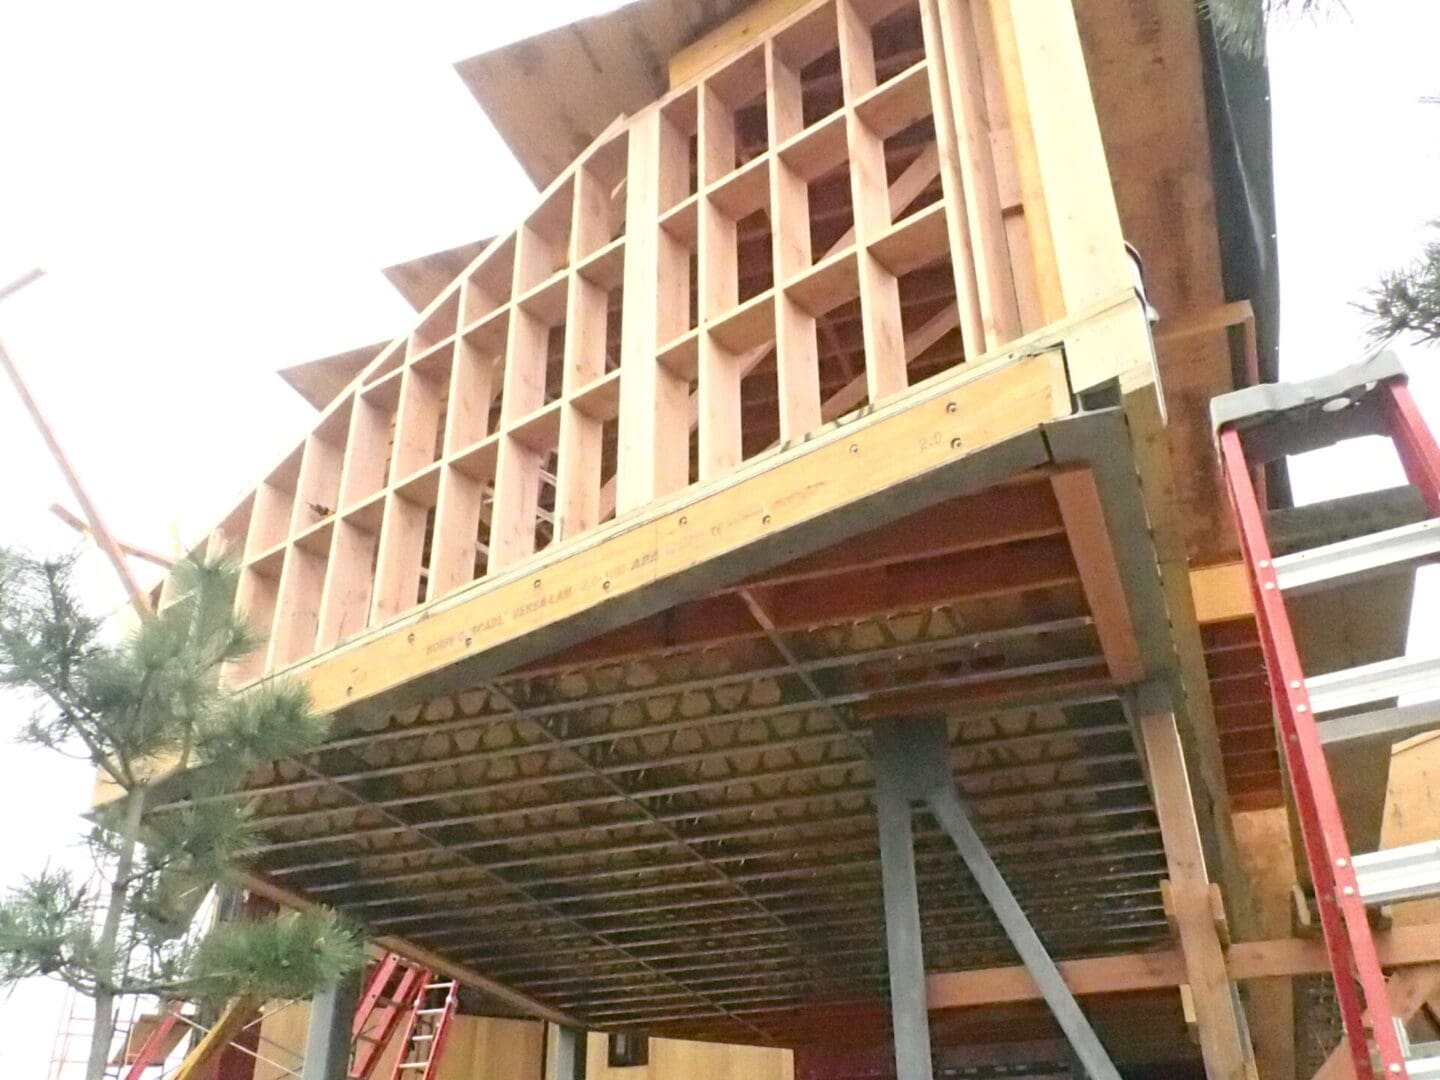 A building under construction with wood framing.